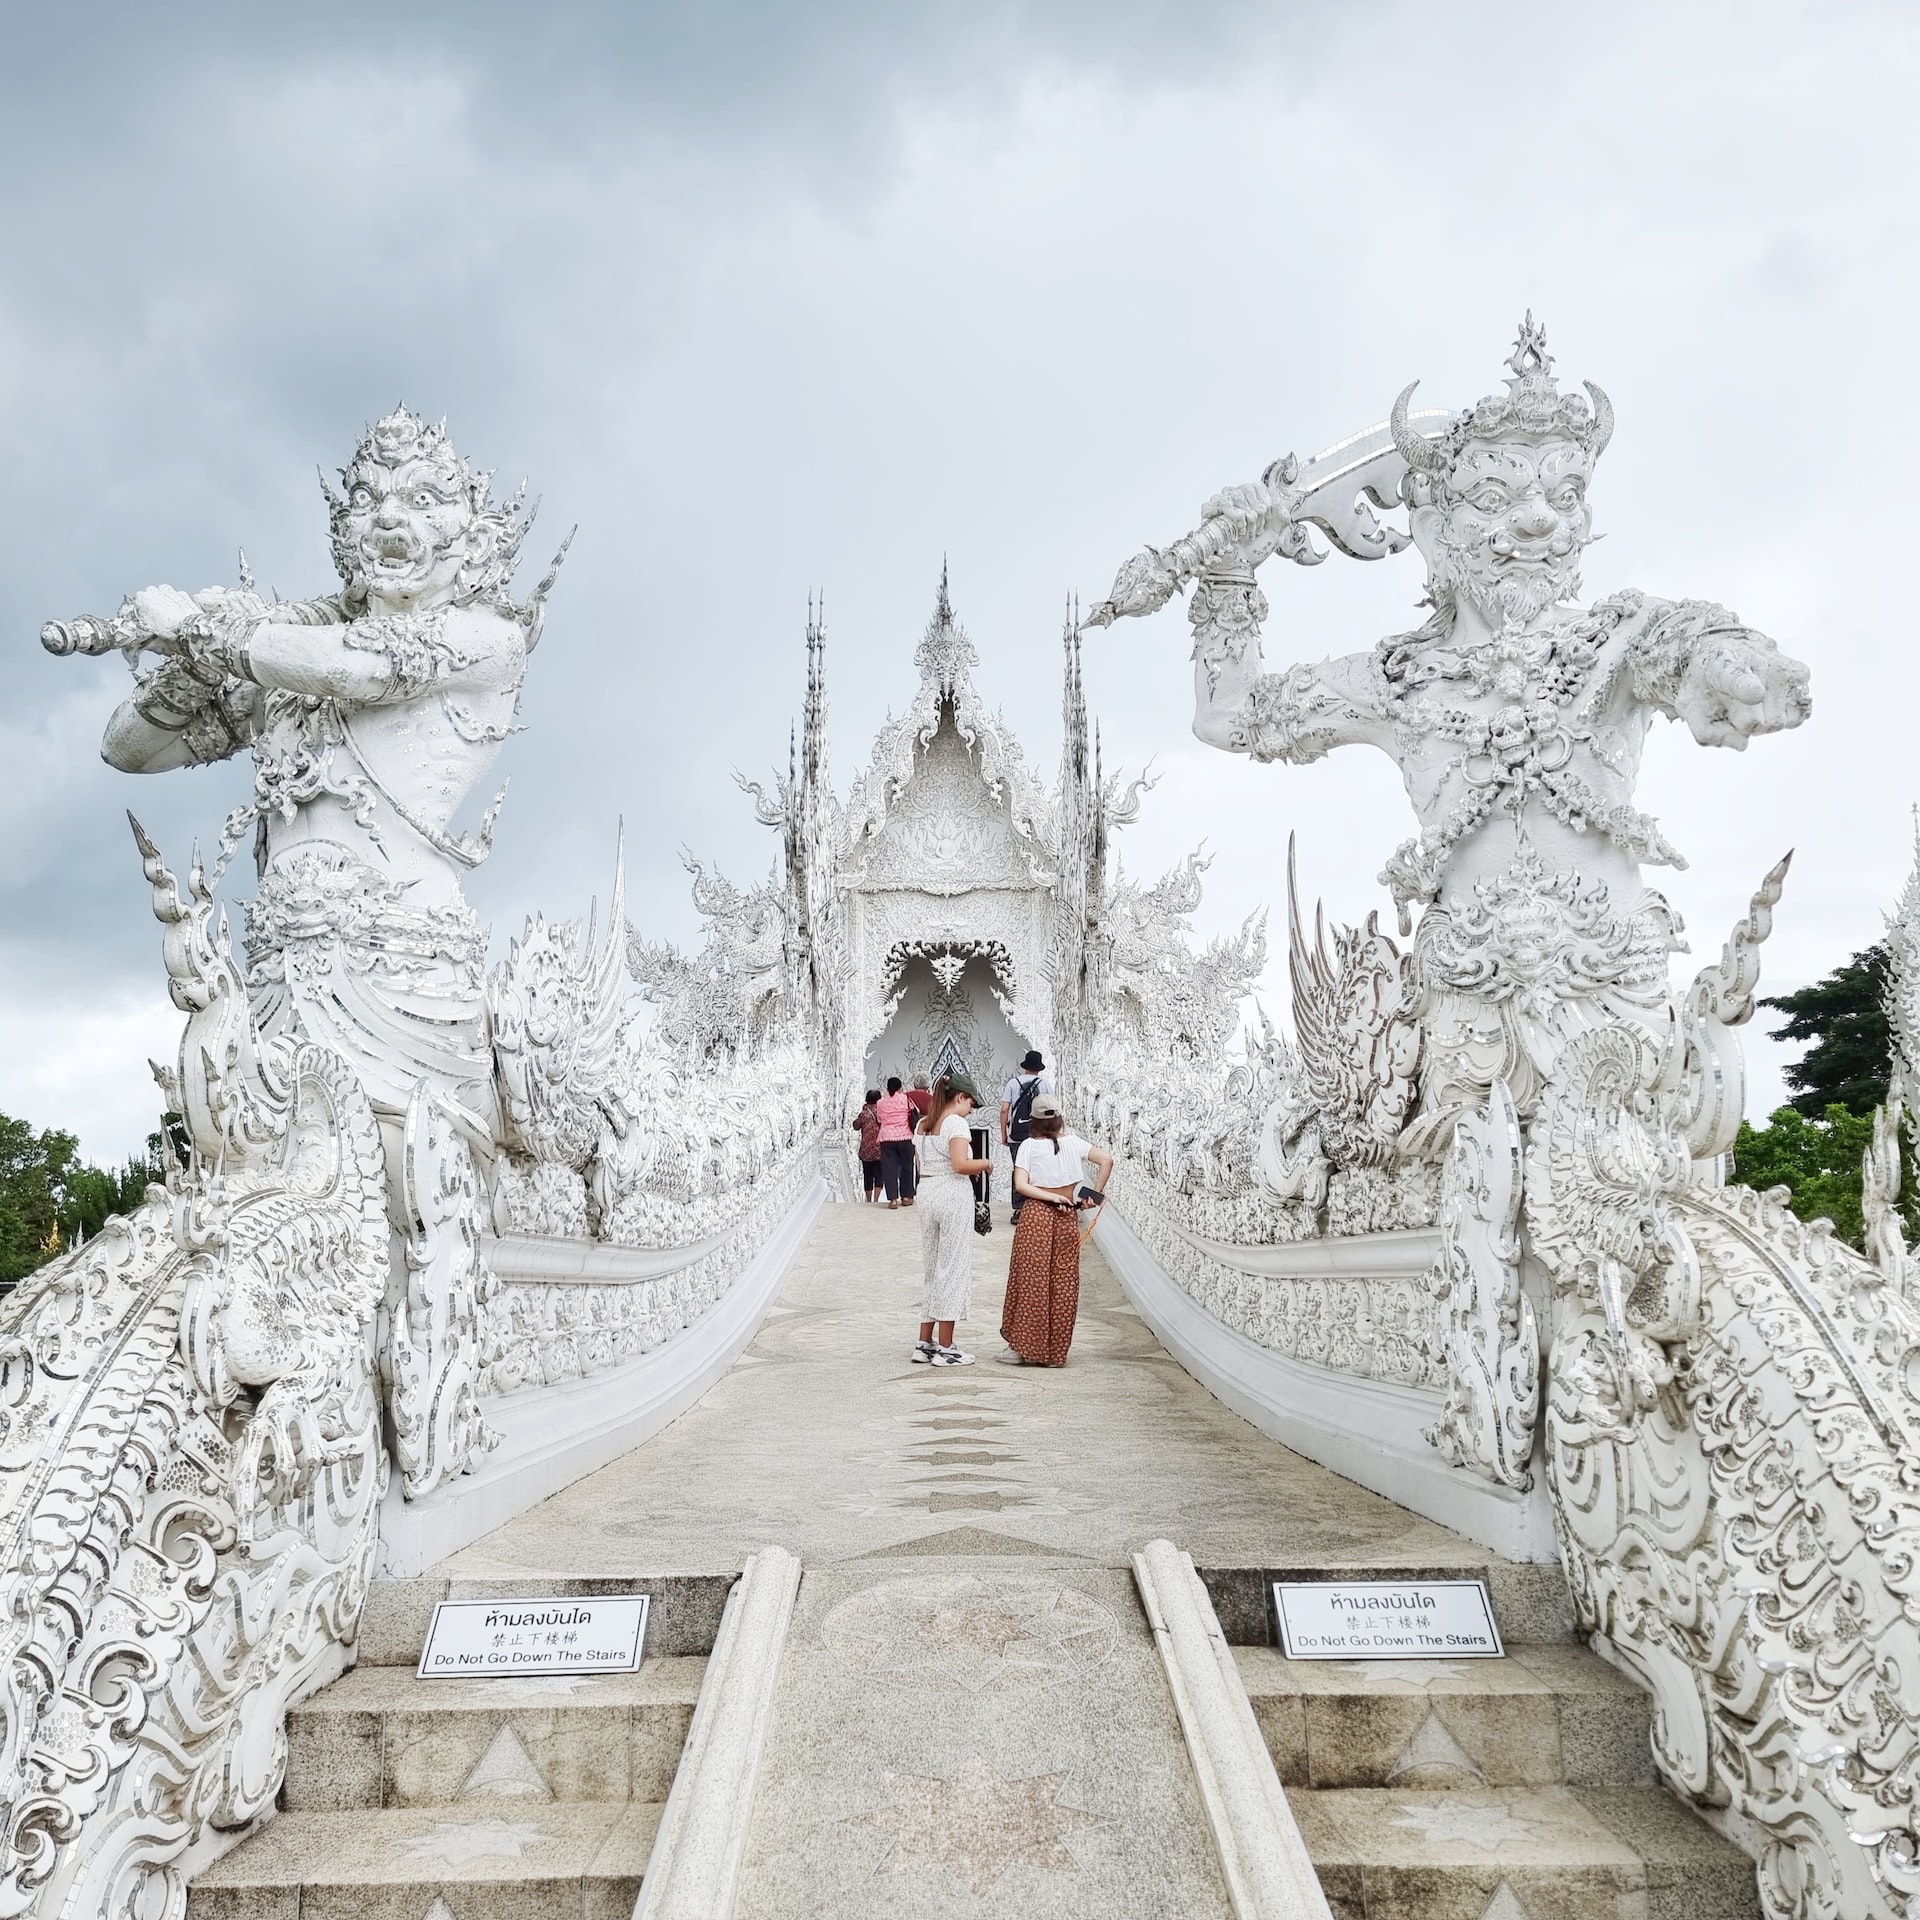 Wat Rong Khun (White Temple) is a hidden gem in Thailand (photo: Miguel Urieta)